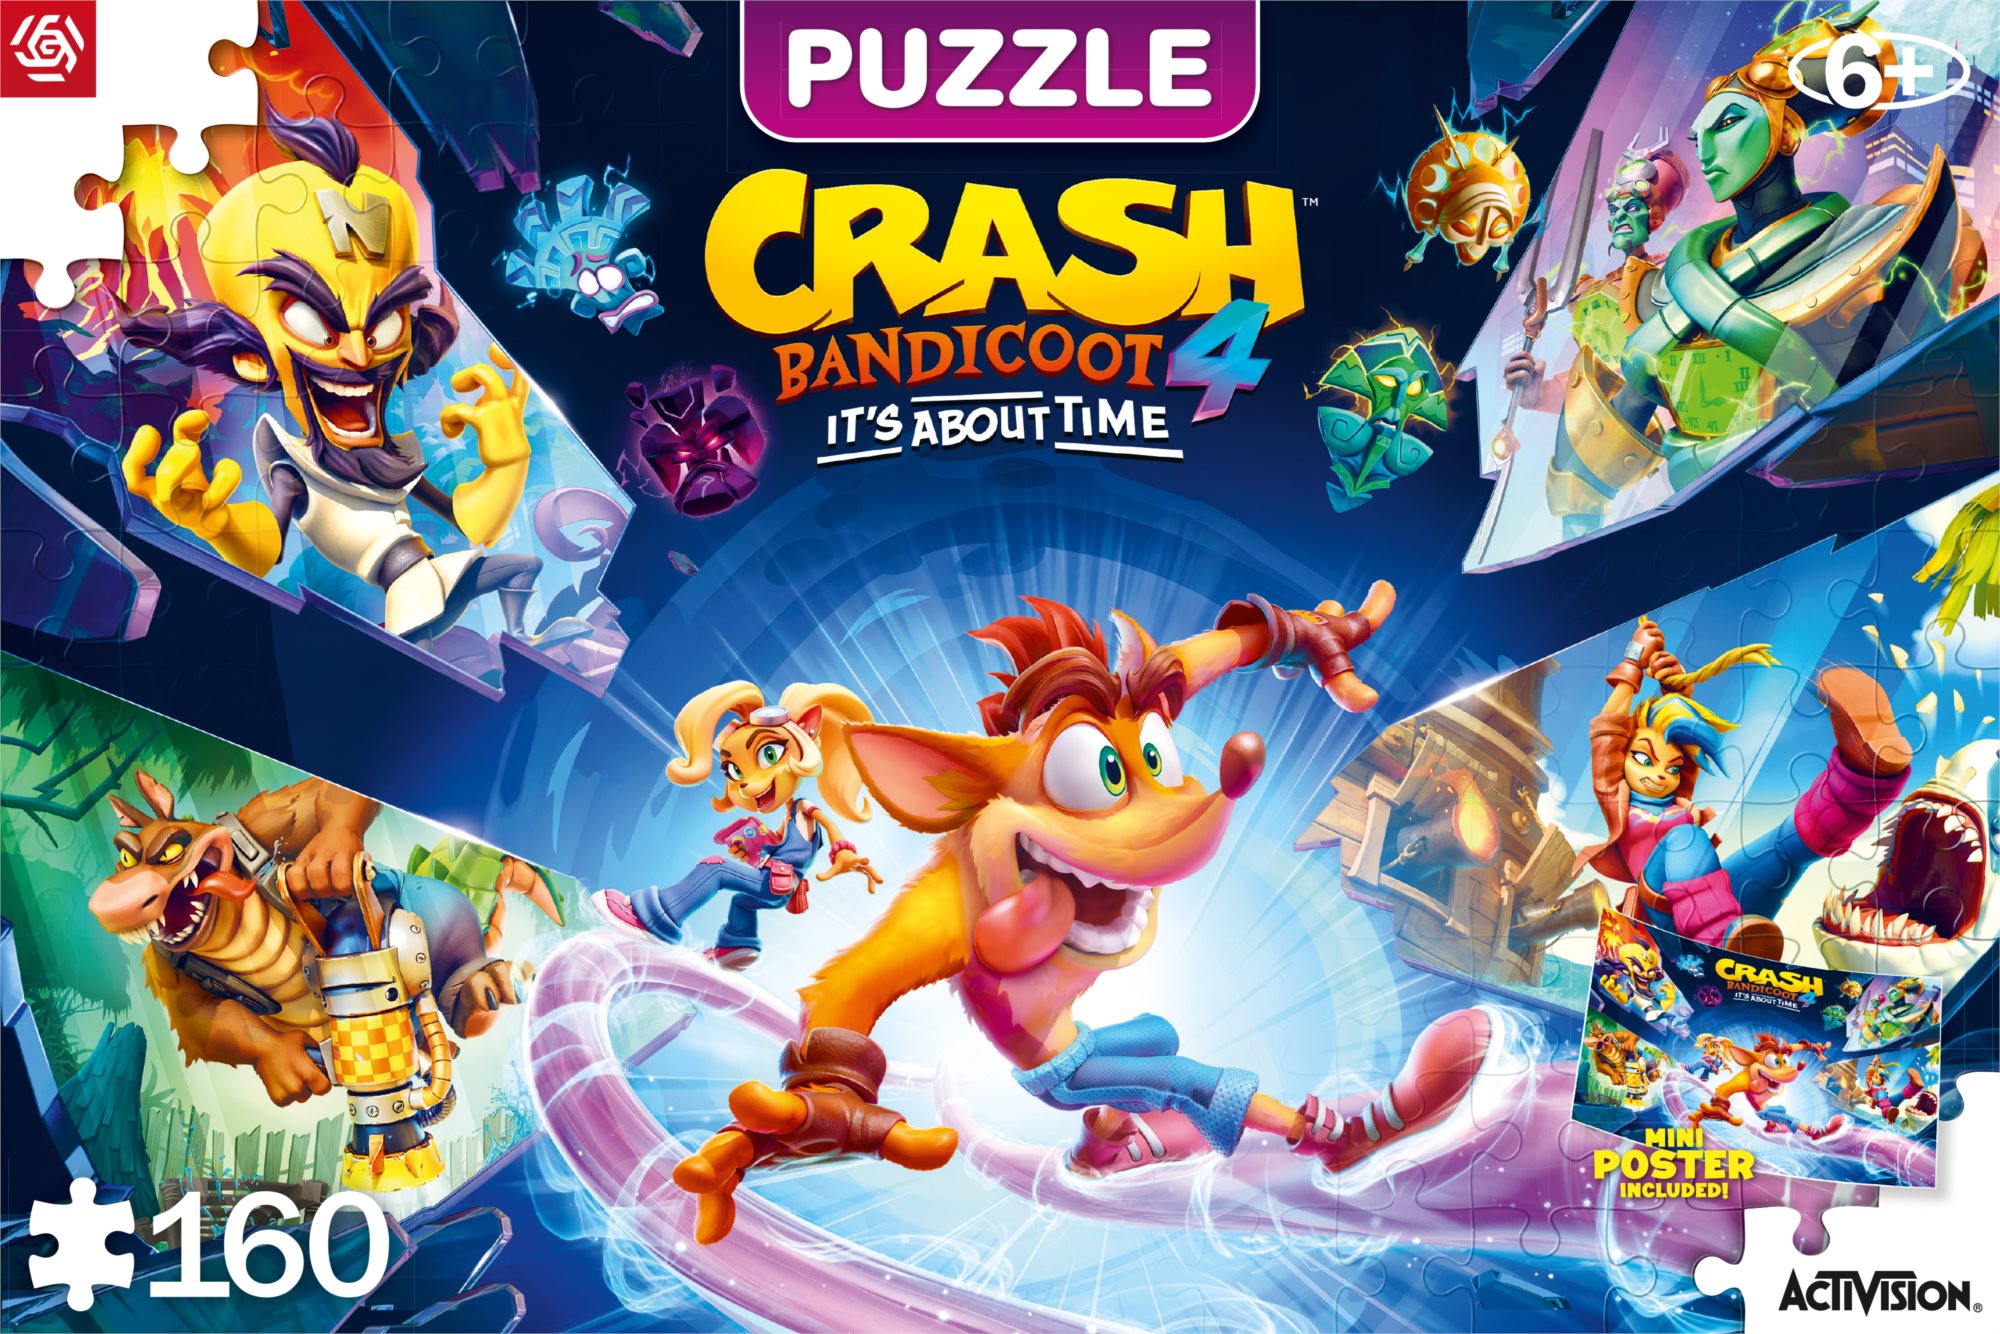 Good Loot Crash Bandicoot 4: Its About Time - Puzzle